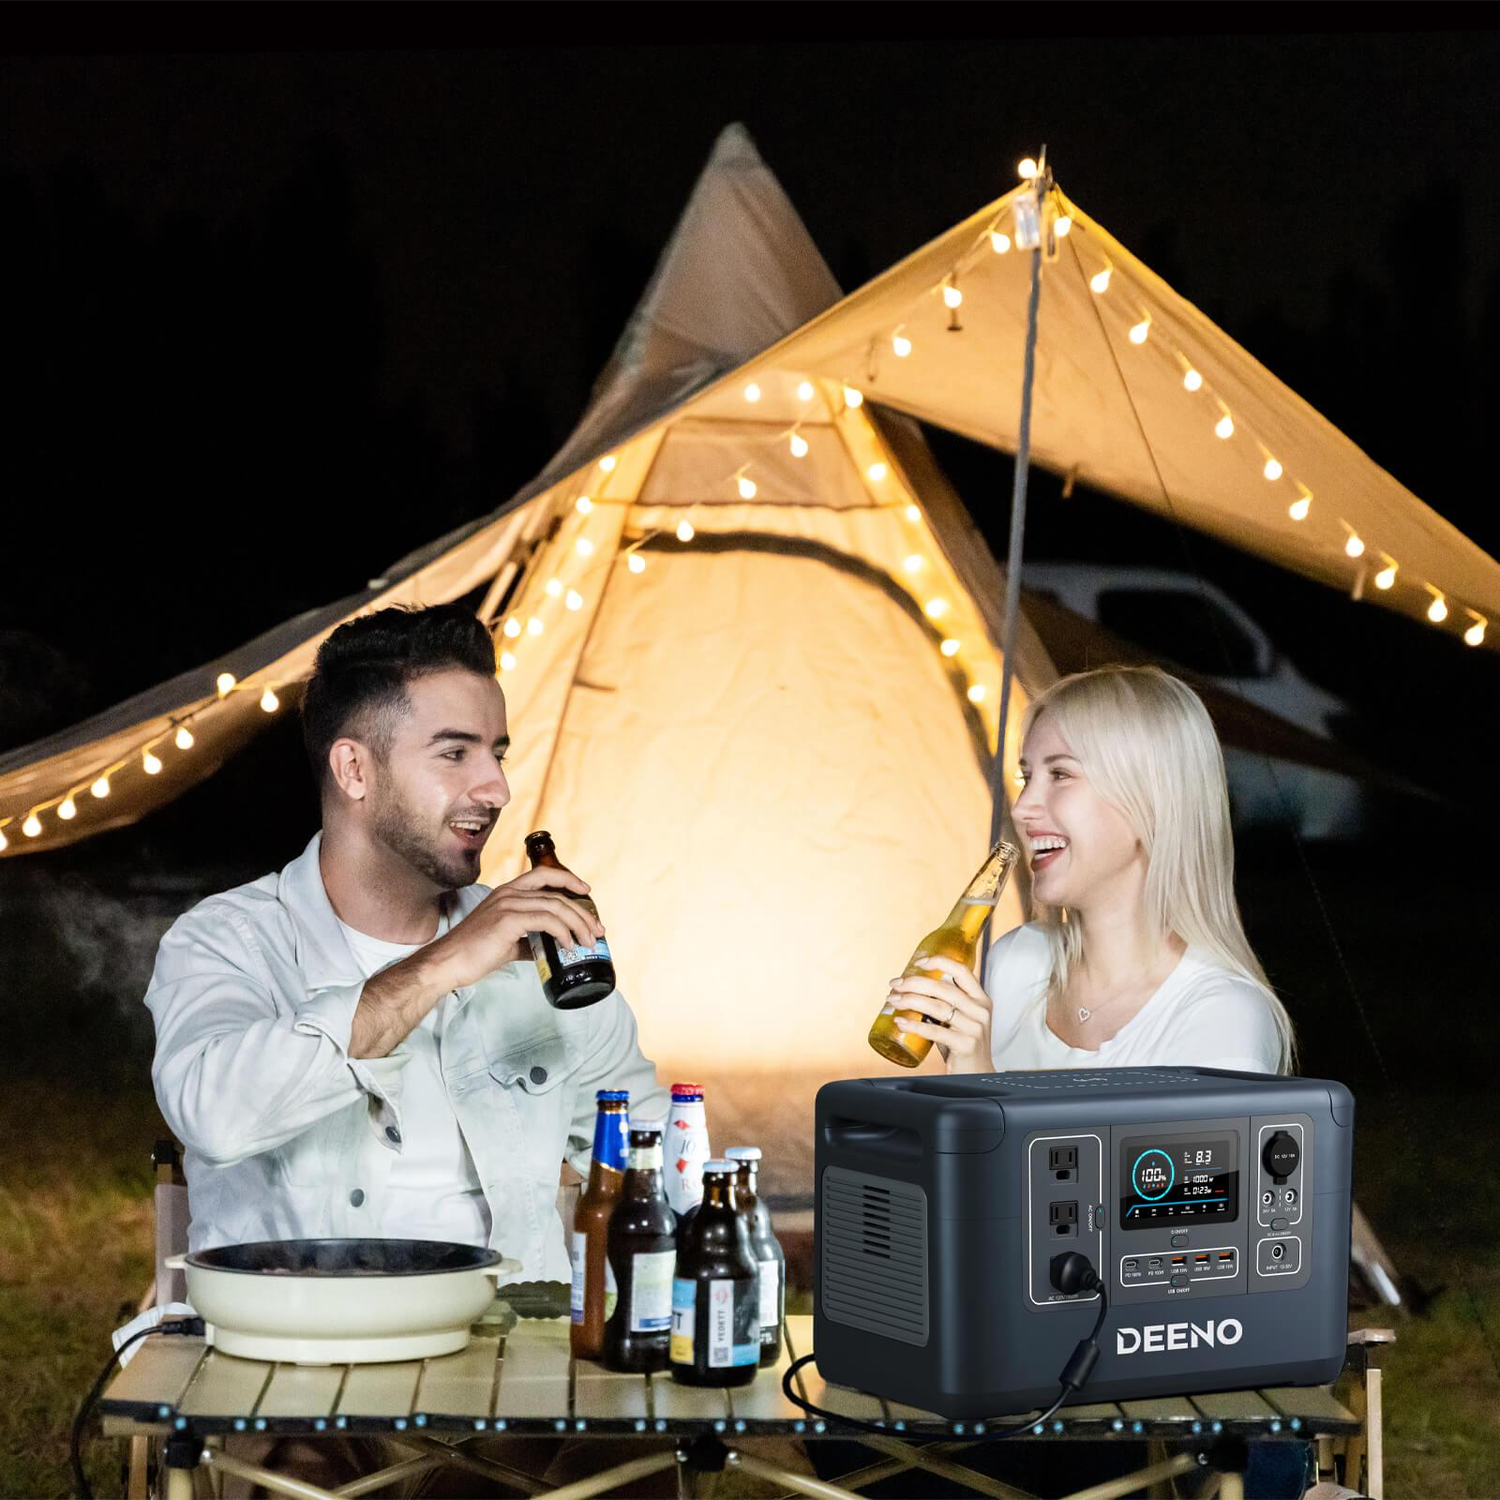 DEENO X1500 Portable Power Station: The Ultimate Off-Grid Power Solution